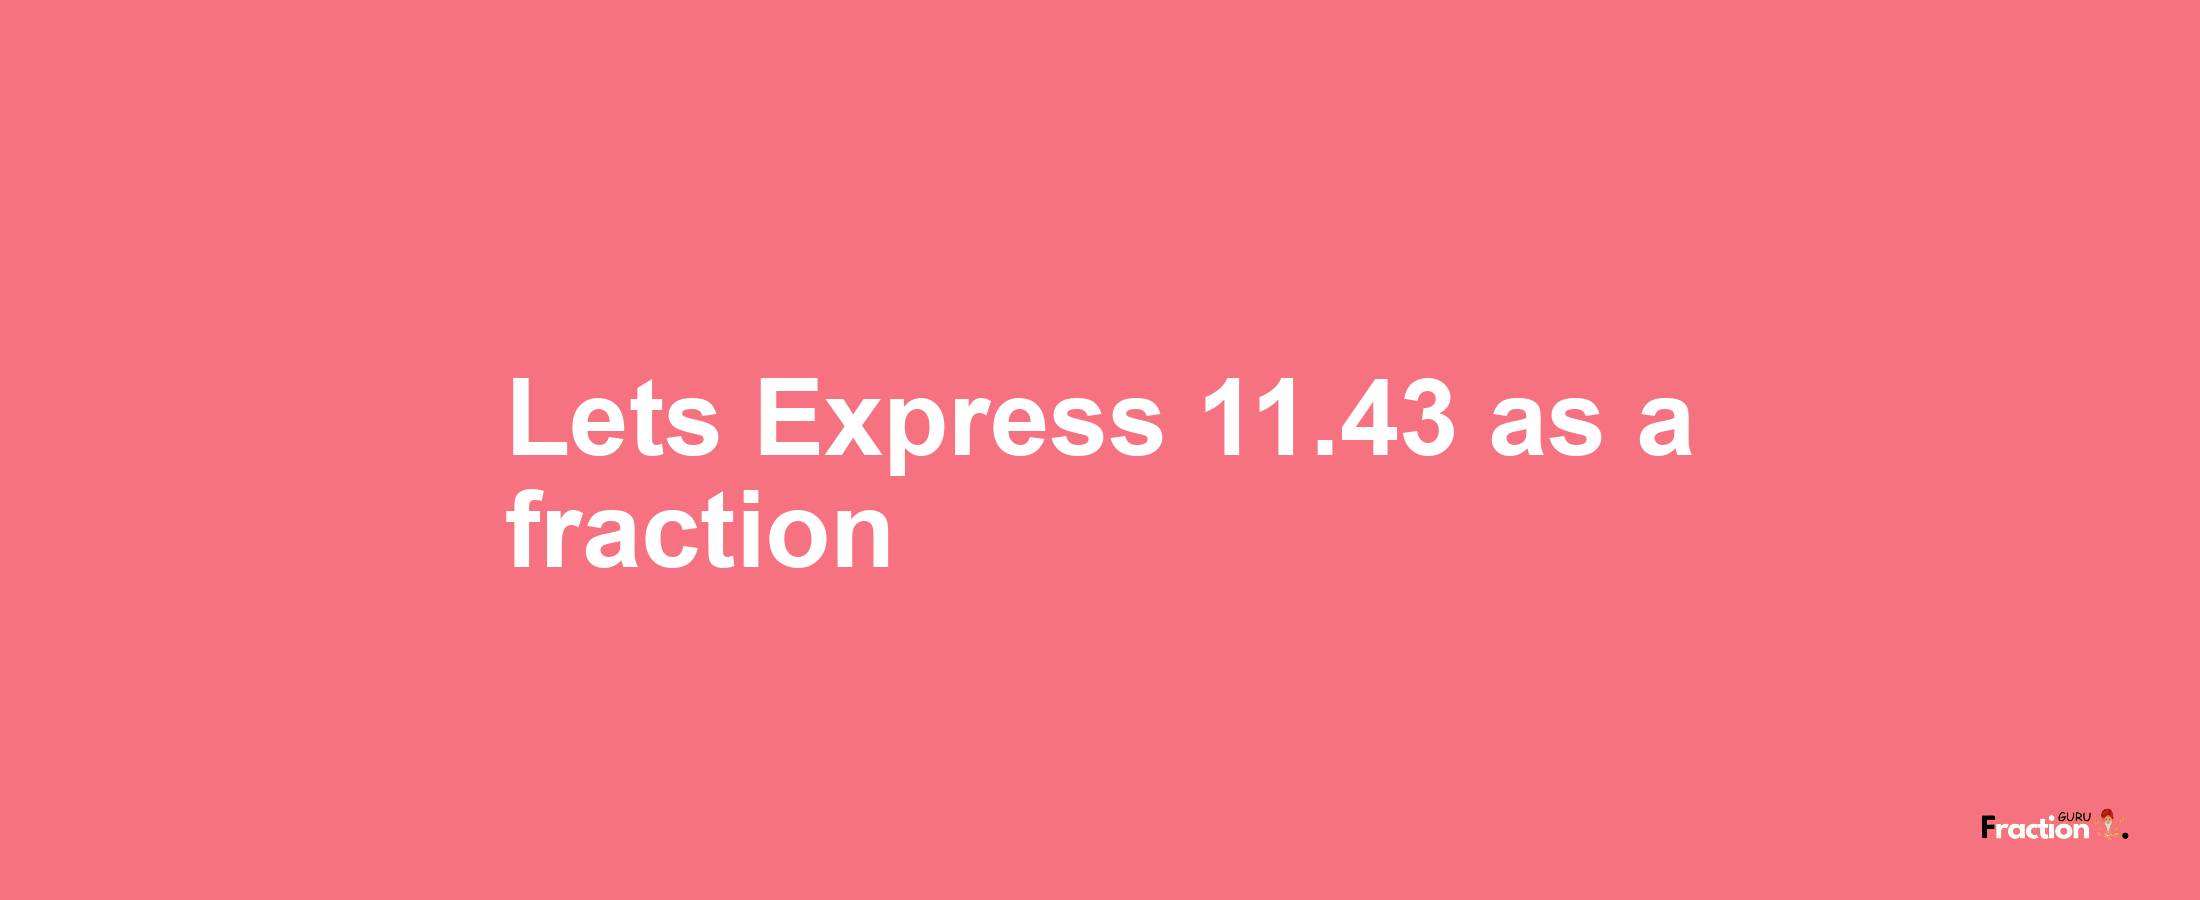 Lets Express 11.43 as afraction